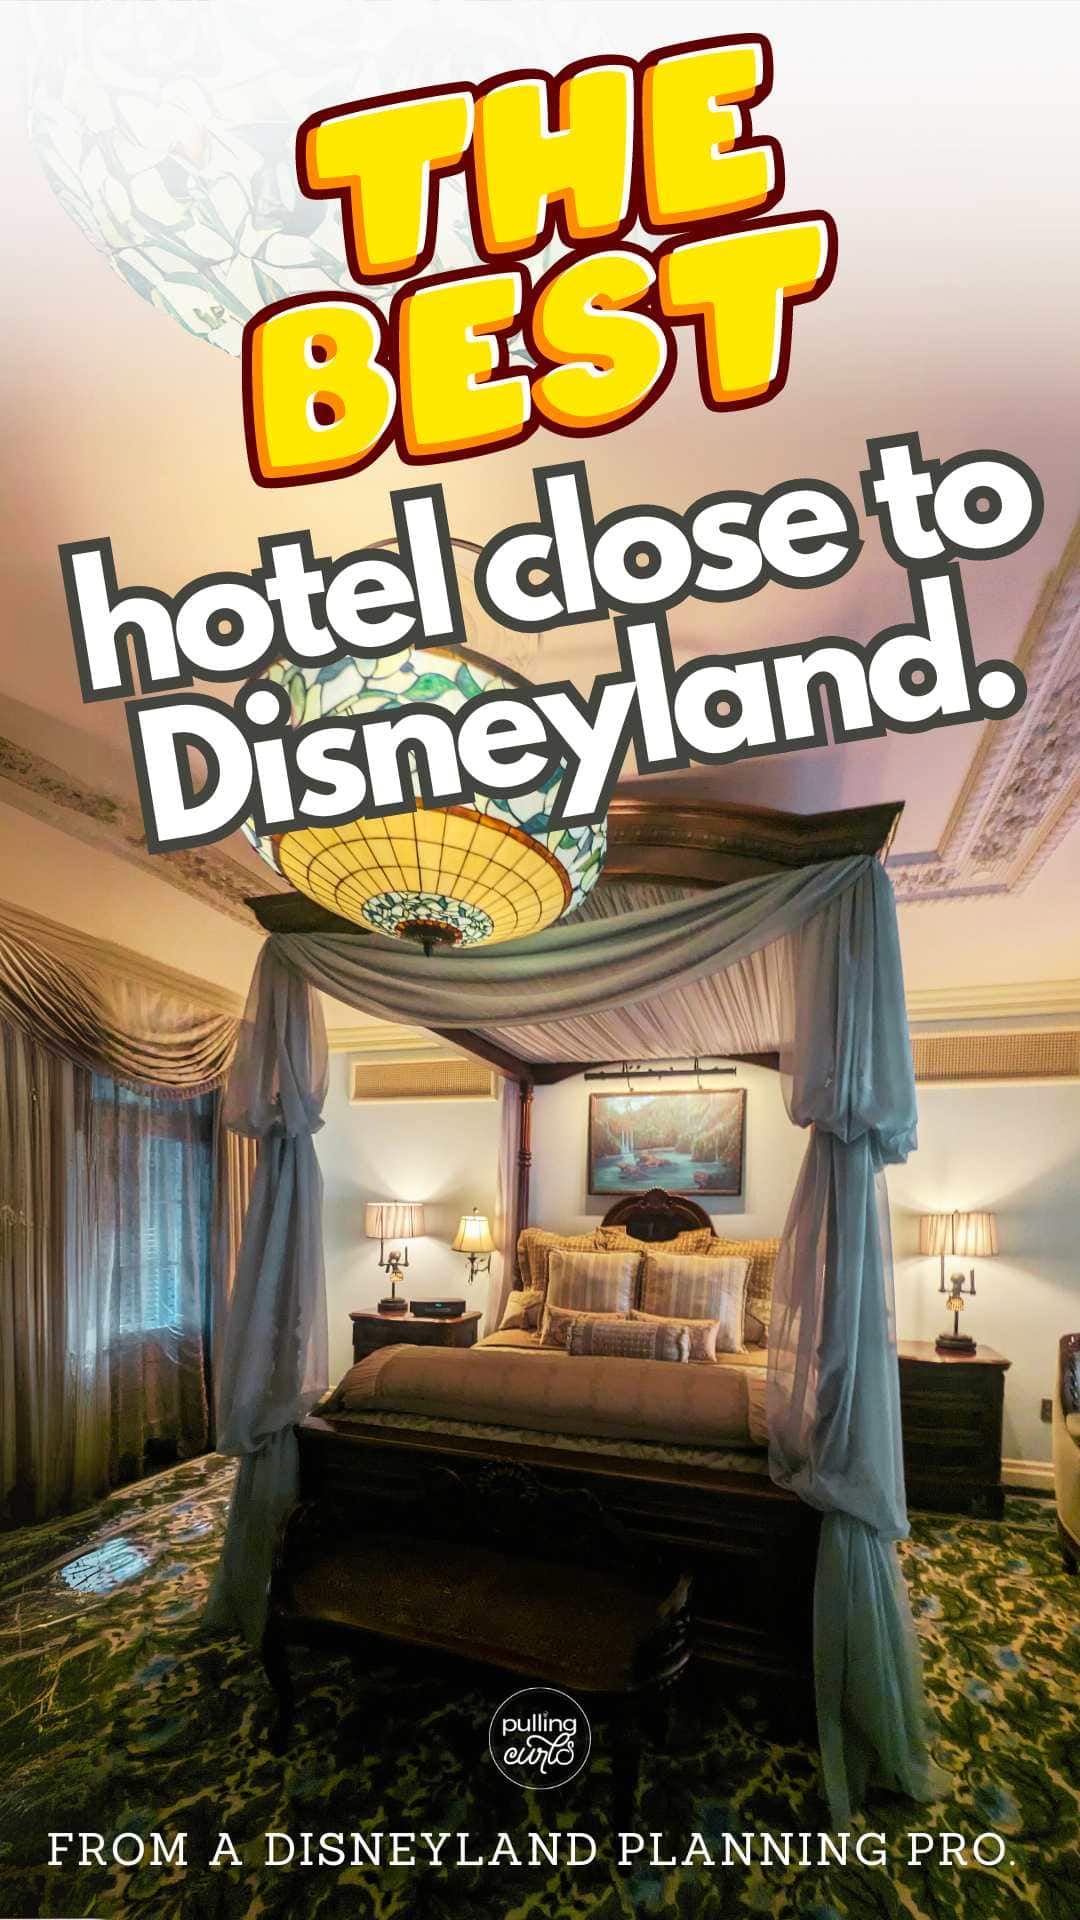 Get the scoop from a Disneyland planning pro. Discover the top five hotels near Disneyland balancing budget and quality. Unlock the secrets of your best stay ever! via @pullingcurls